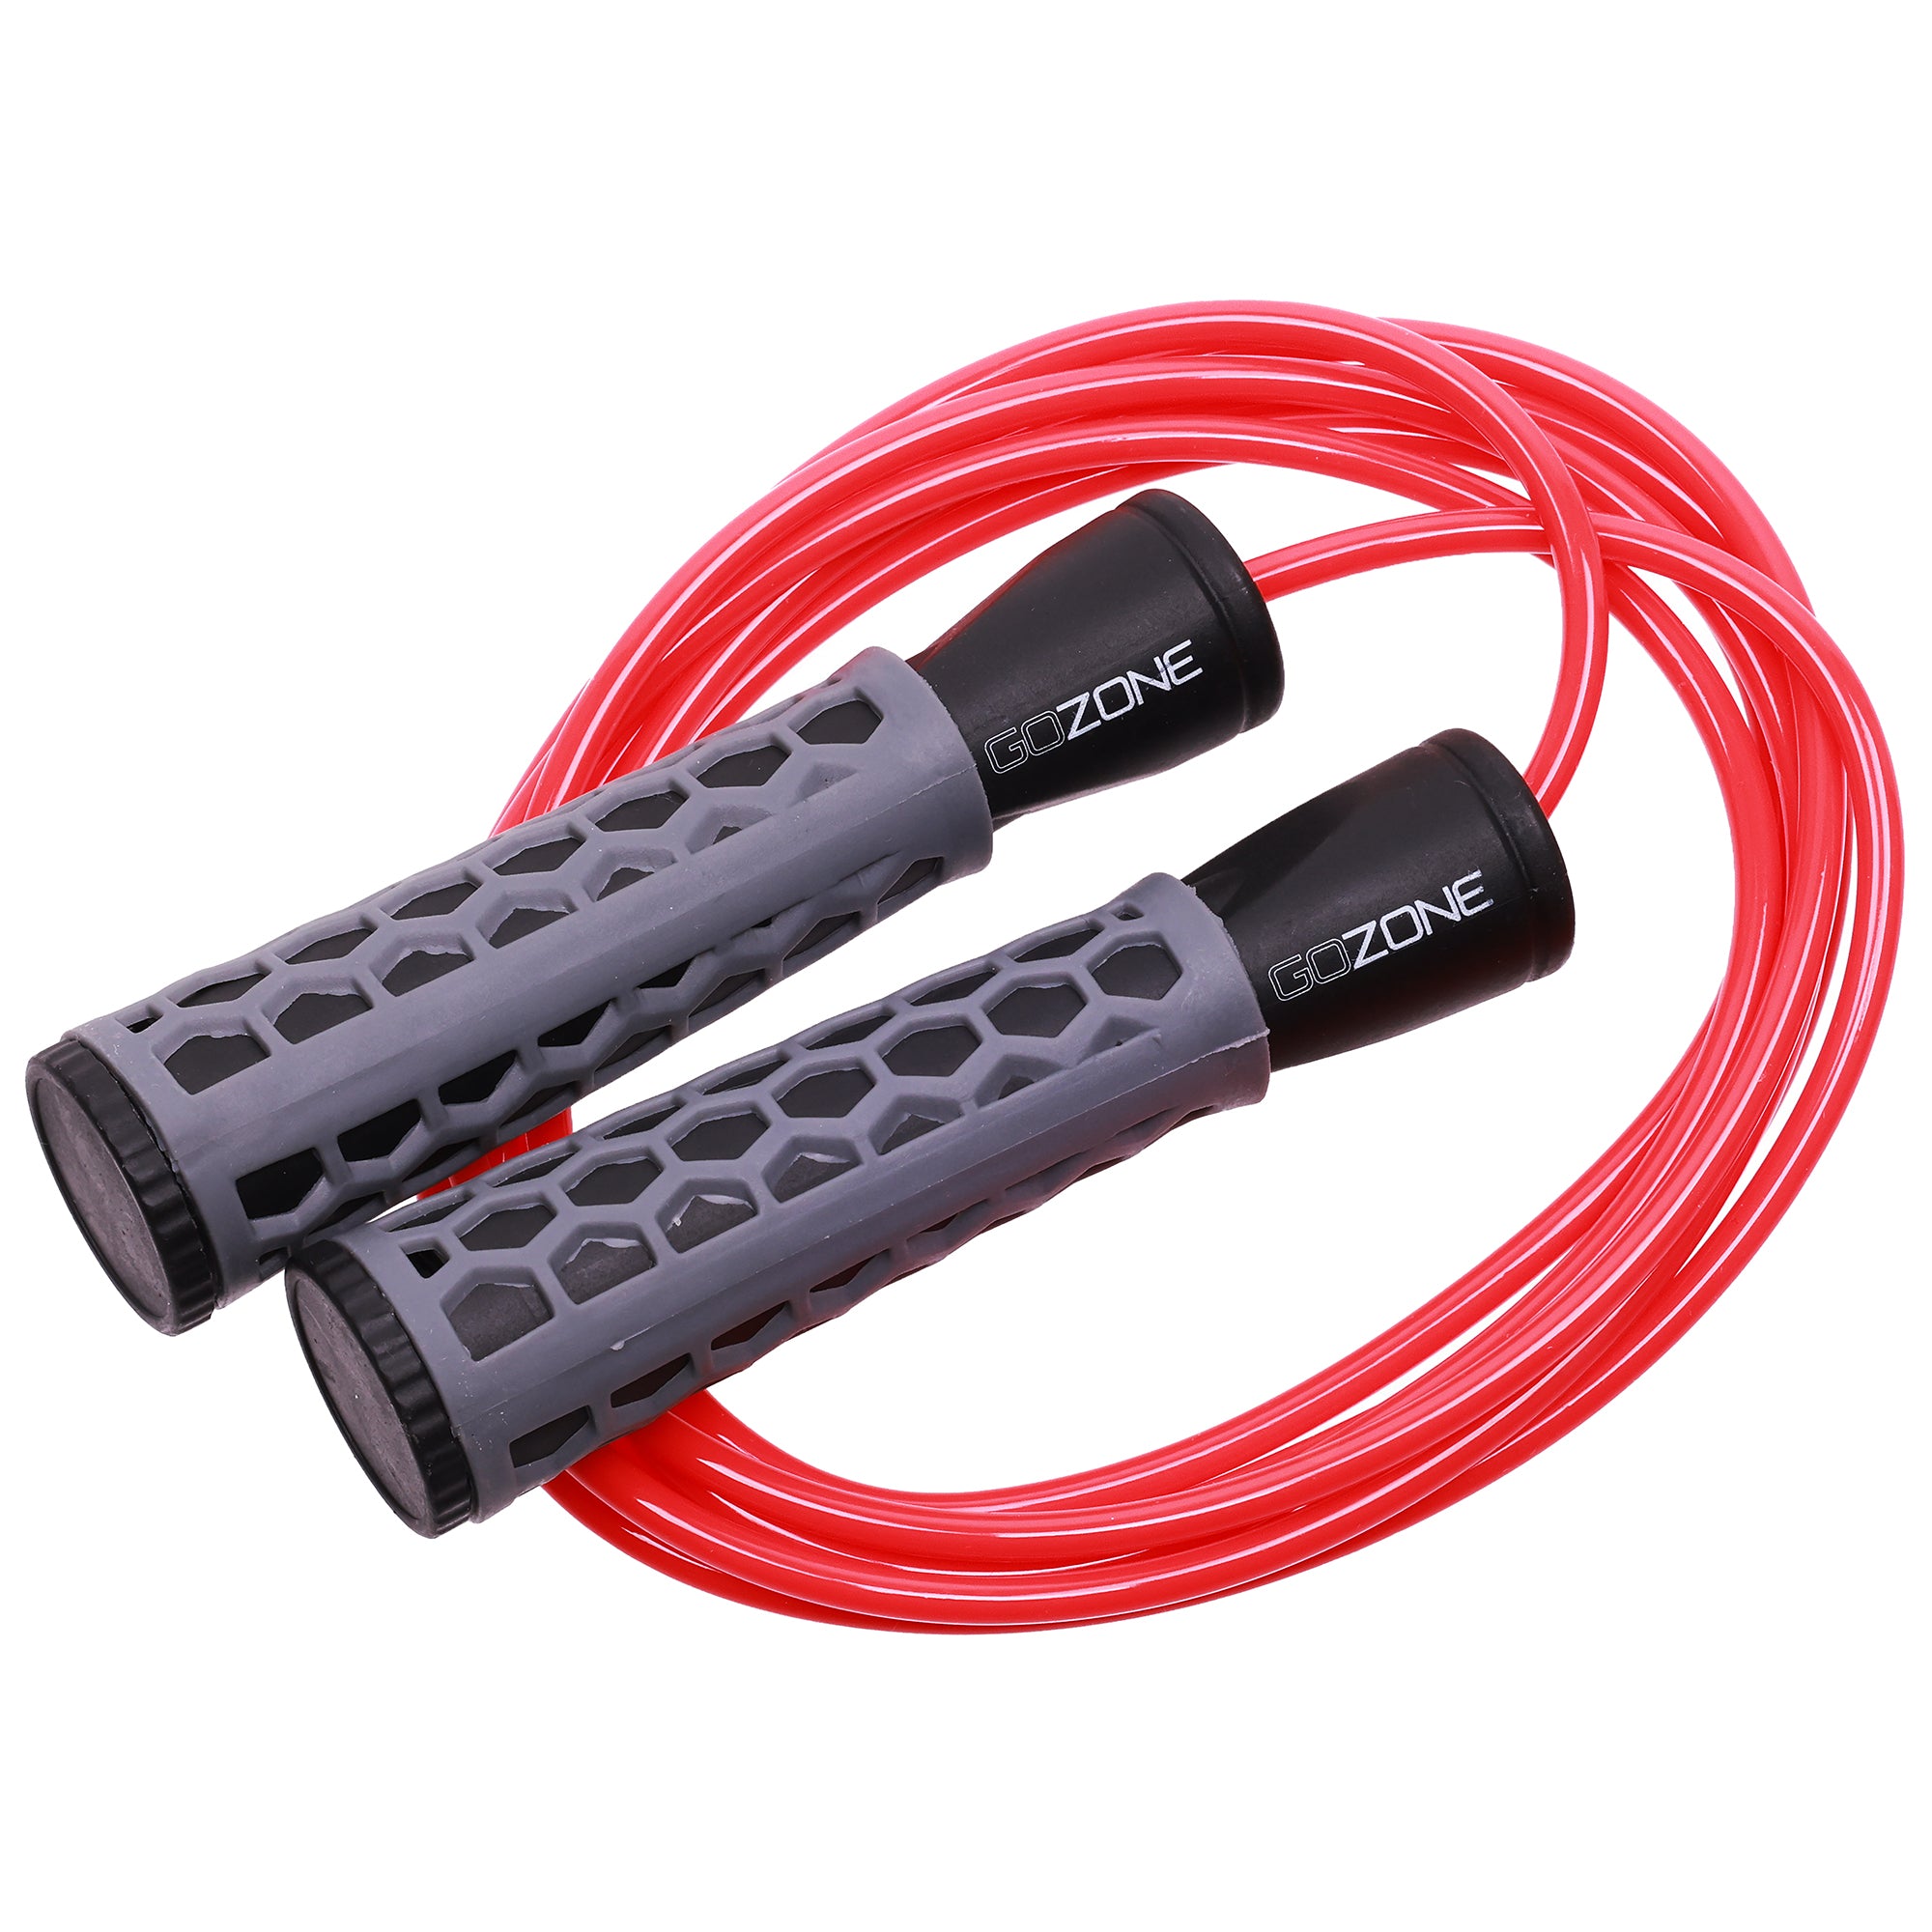 GoZone Cardio Jump Rope – Red/Black, Designed for smooth rotation